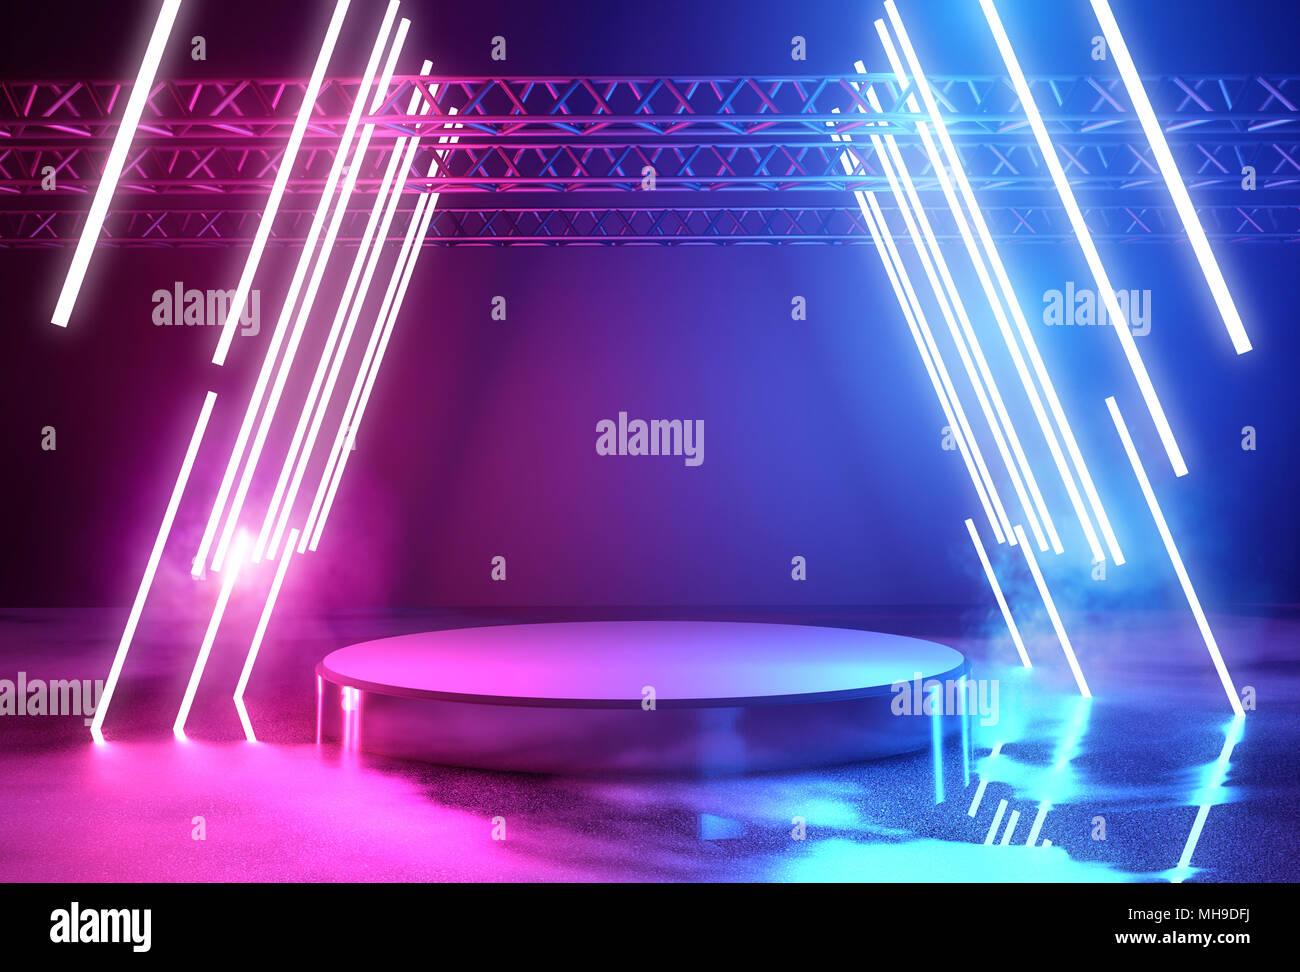 Glowing neon lighting and a blank platform for product placement, 3D illustration. Stock Photo